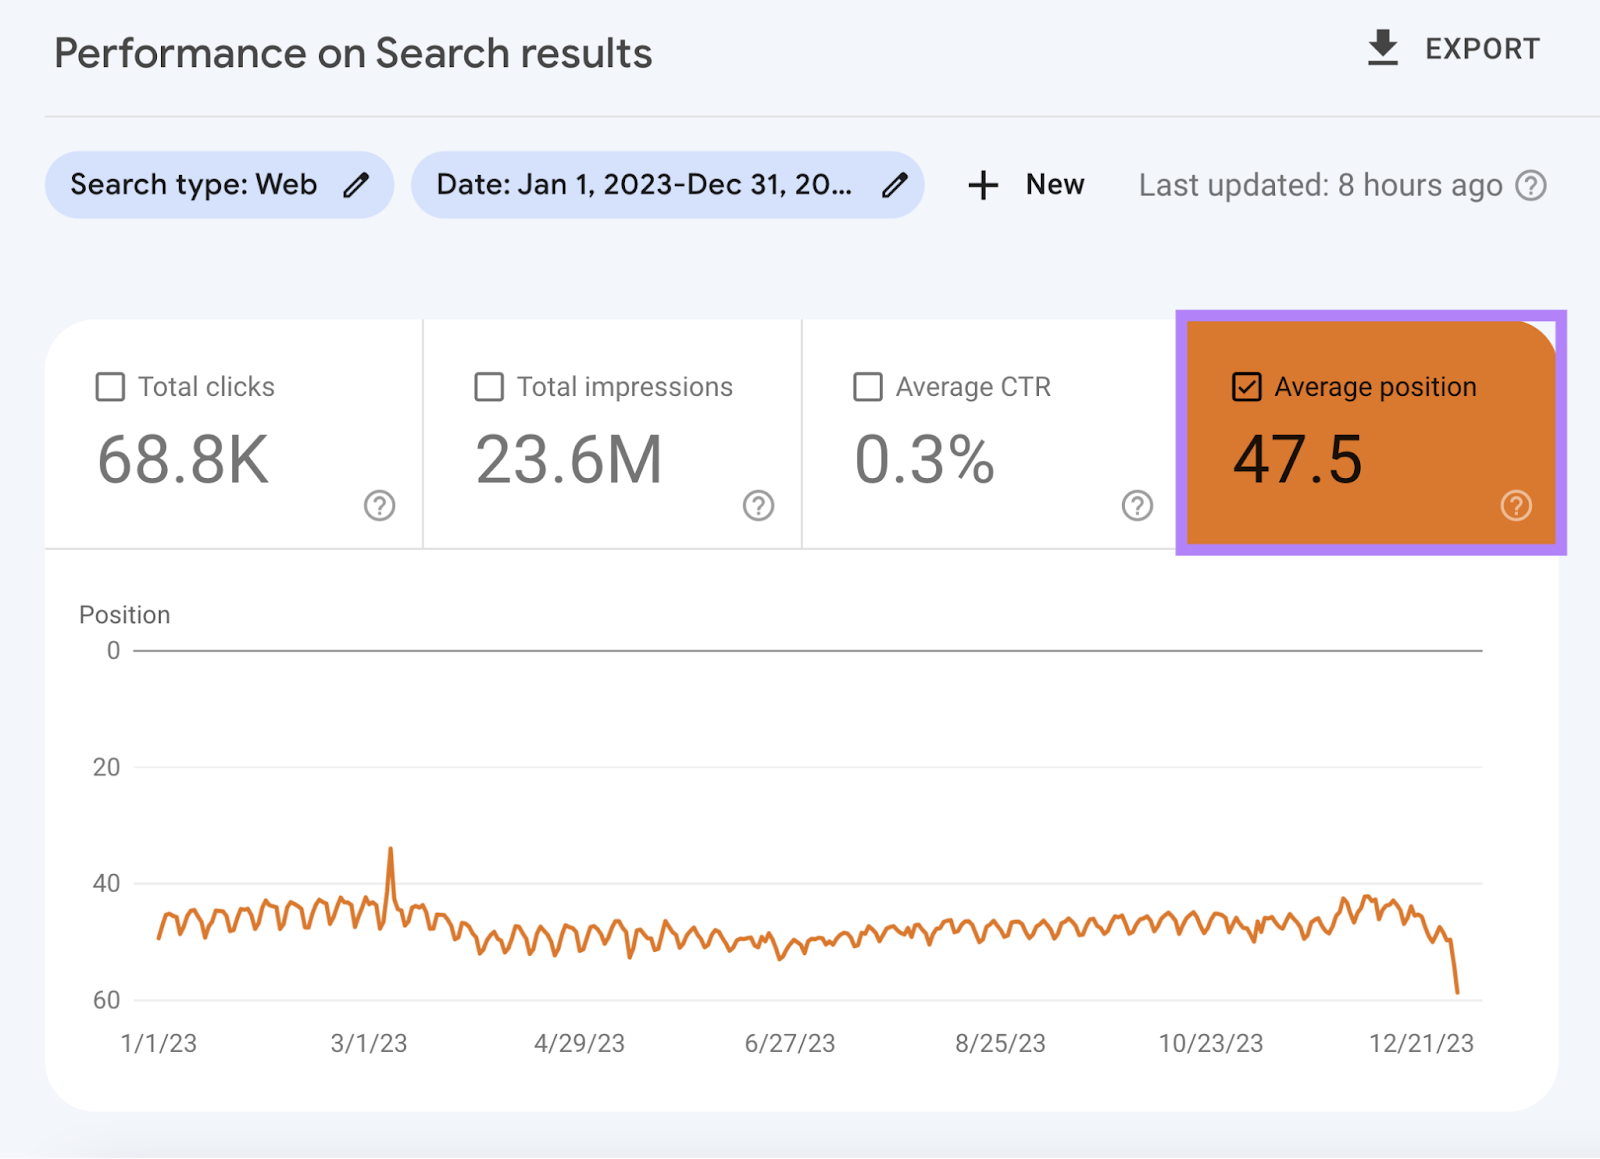 Performance on Search results graph in GSC, showing the average position data